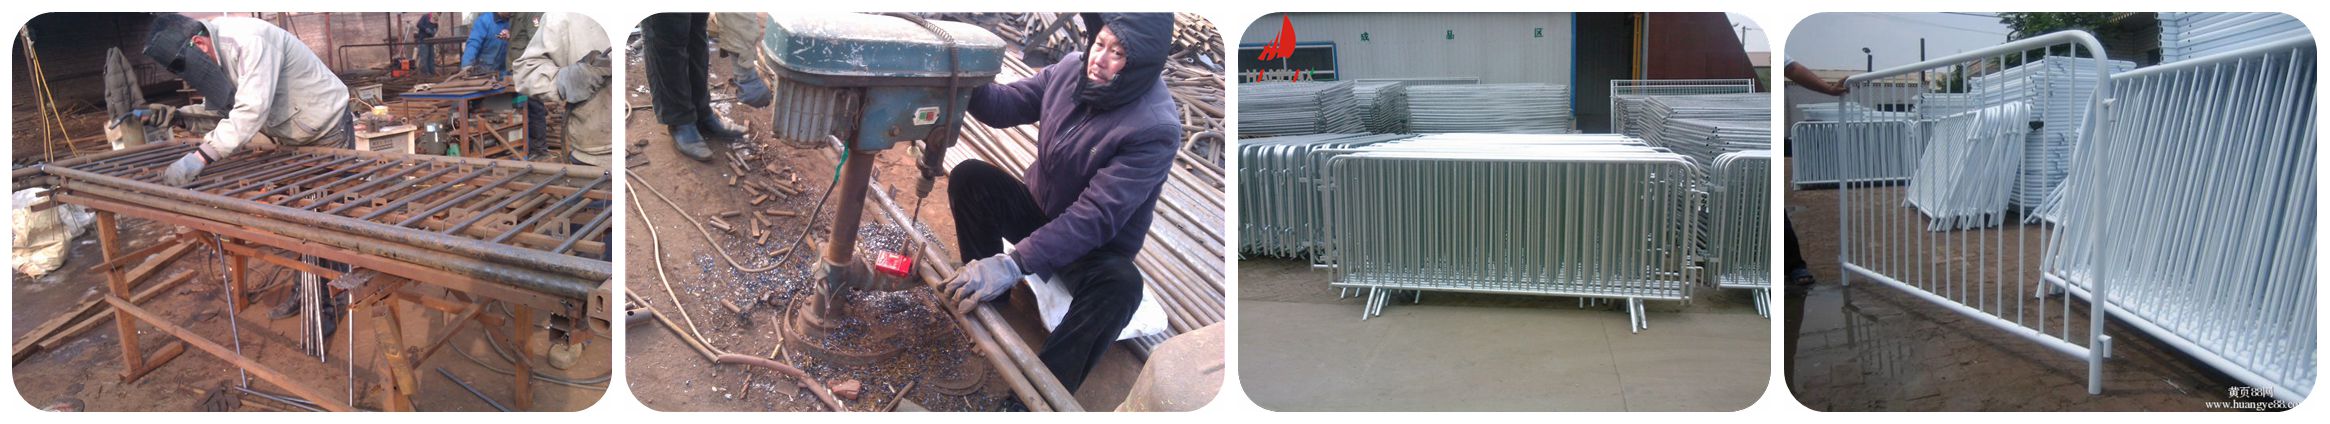 crowd control barrier welding and galvanized processing